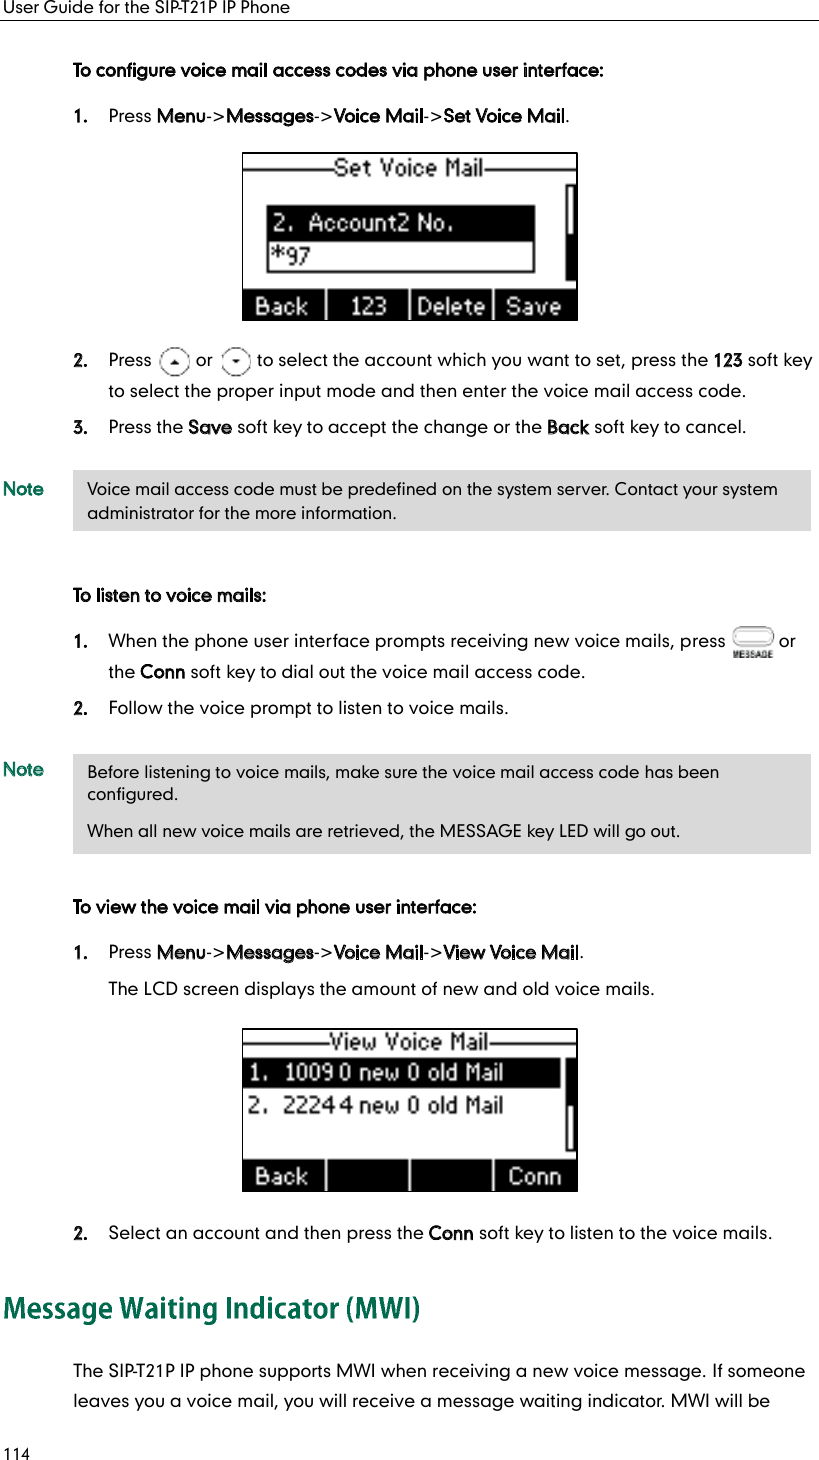 User Guide for the SIP-T21P IP Phone 114 To configure voice mail access codes via phone user interface: 1. Press Menu-&gt;Messages-&gt;Voice Mail-&gt;Set Voice Mail.  2. Press     or     to select the account which you want to set, press the 123 soft key to select the proper input mode and then enter the voice mail access code. 3. Press the Save soft key to accept the change or the Back soft key to cancel. Note To listen to voice mails: 1. When the phone user interface prompts receiving new voice mails, press      or the Conn soft key to dial out the voice mail access code. 2. Follow the voice prompt to listen to voice mails. Note To view the voice mail via phone user interface: 1. Press Menu-&gt;Messages-&gt;Voice Mail-&gt;View Voice Mail. The LCD screen displays the amount of new and old voice mails.  2. Select an account and then press the Conn soft key to listen to the voice mails. The SIP-T21P IP phone supports MWI when receiving a new voice message. If someone leaves you a voice mail, you will receive a message waiting indicator. MWI will be Voice mail access code must be predefined on the system server. Contact your system administrator for the more information. Before listening to voice mails, make sure the voice mail access code has been configured. When all new voice mails are retrieved, the MESSAGE key LED will go out. 